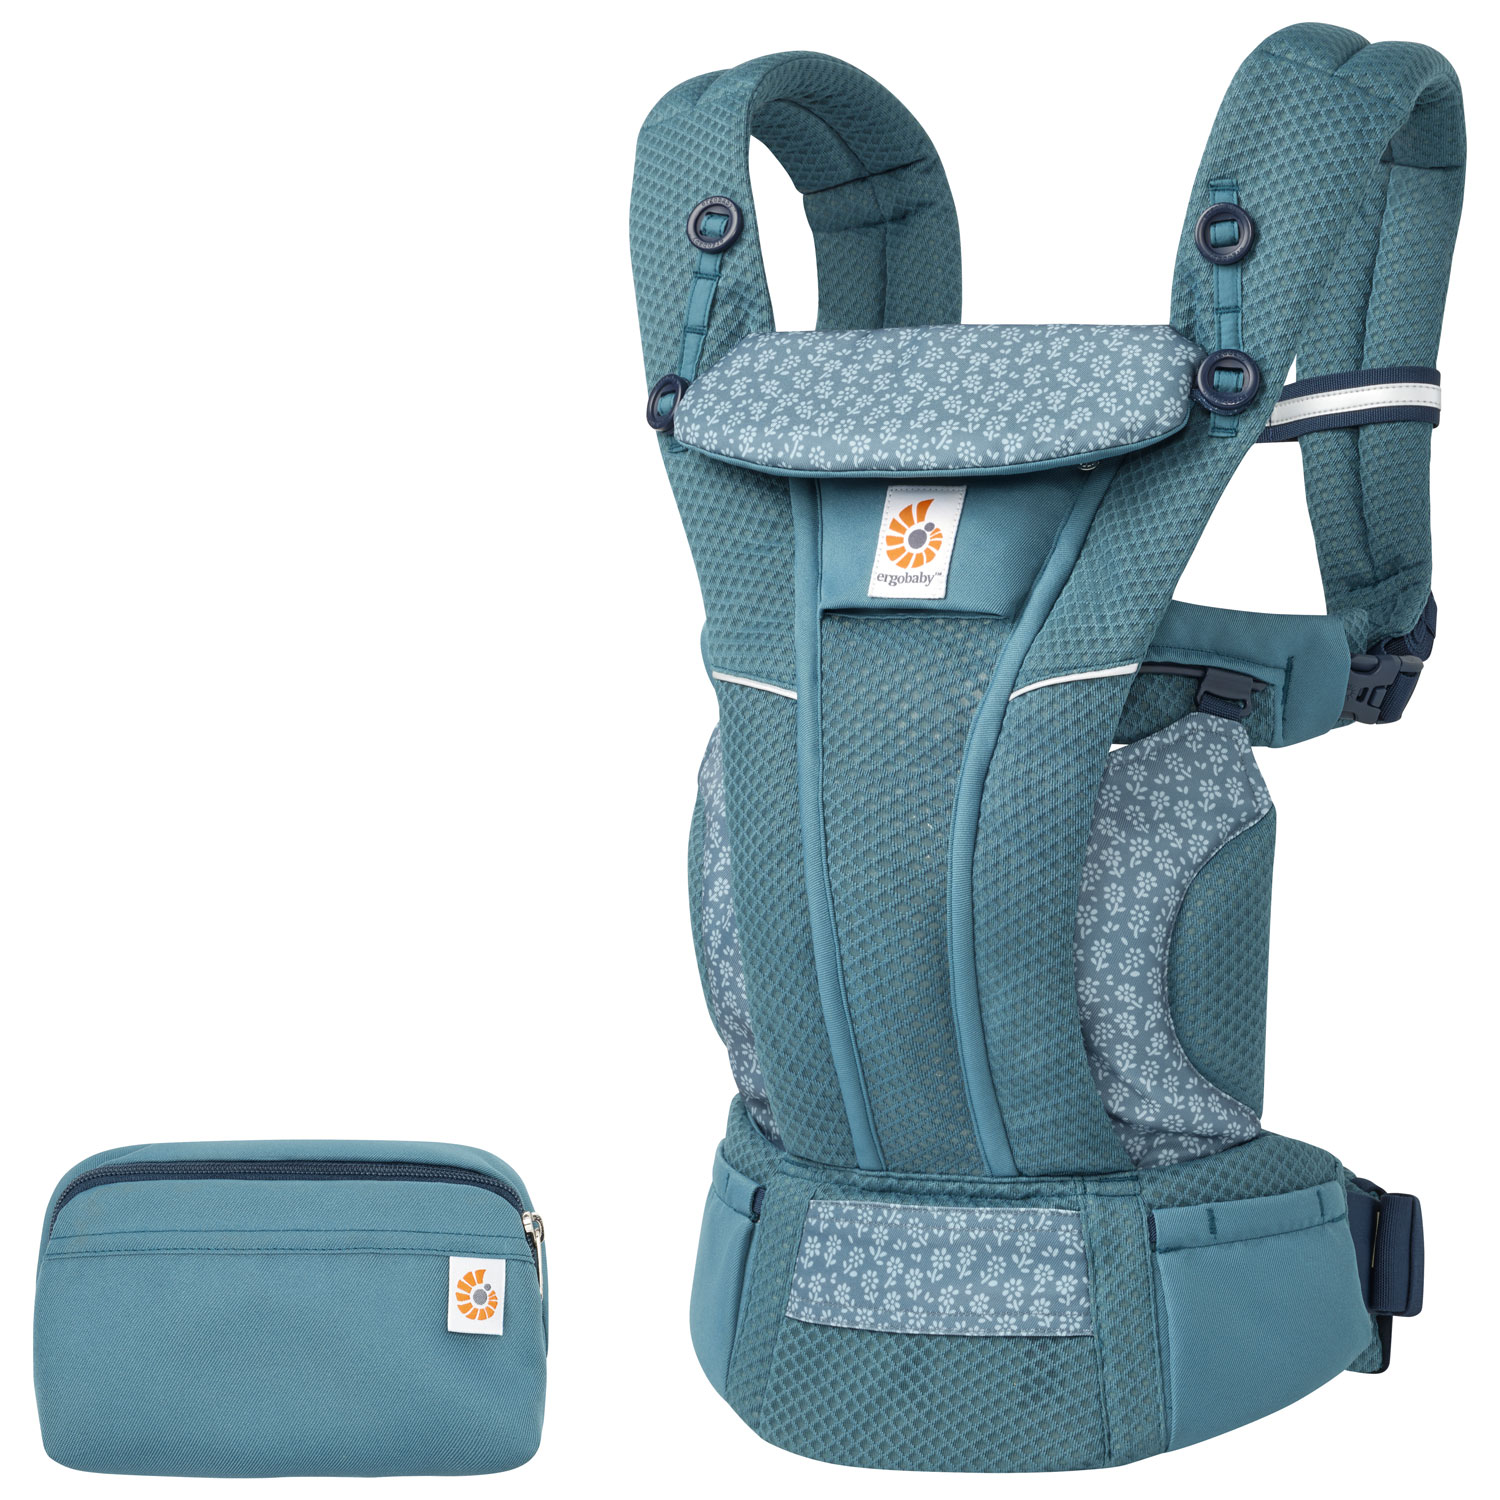 Ergobaby Omni Breeze Four Position Baby Carrier - Twilight Daisy